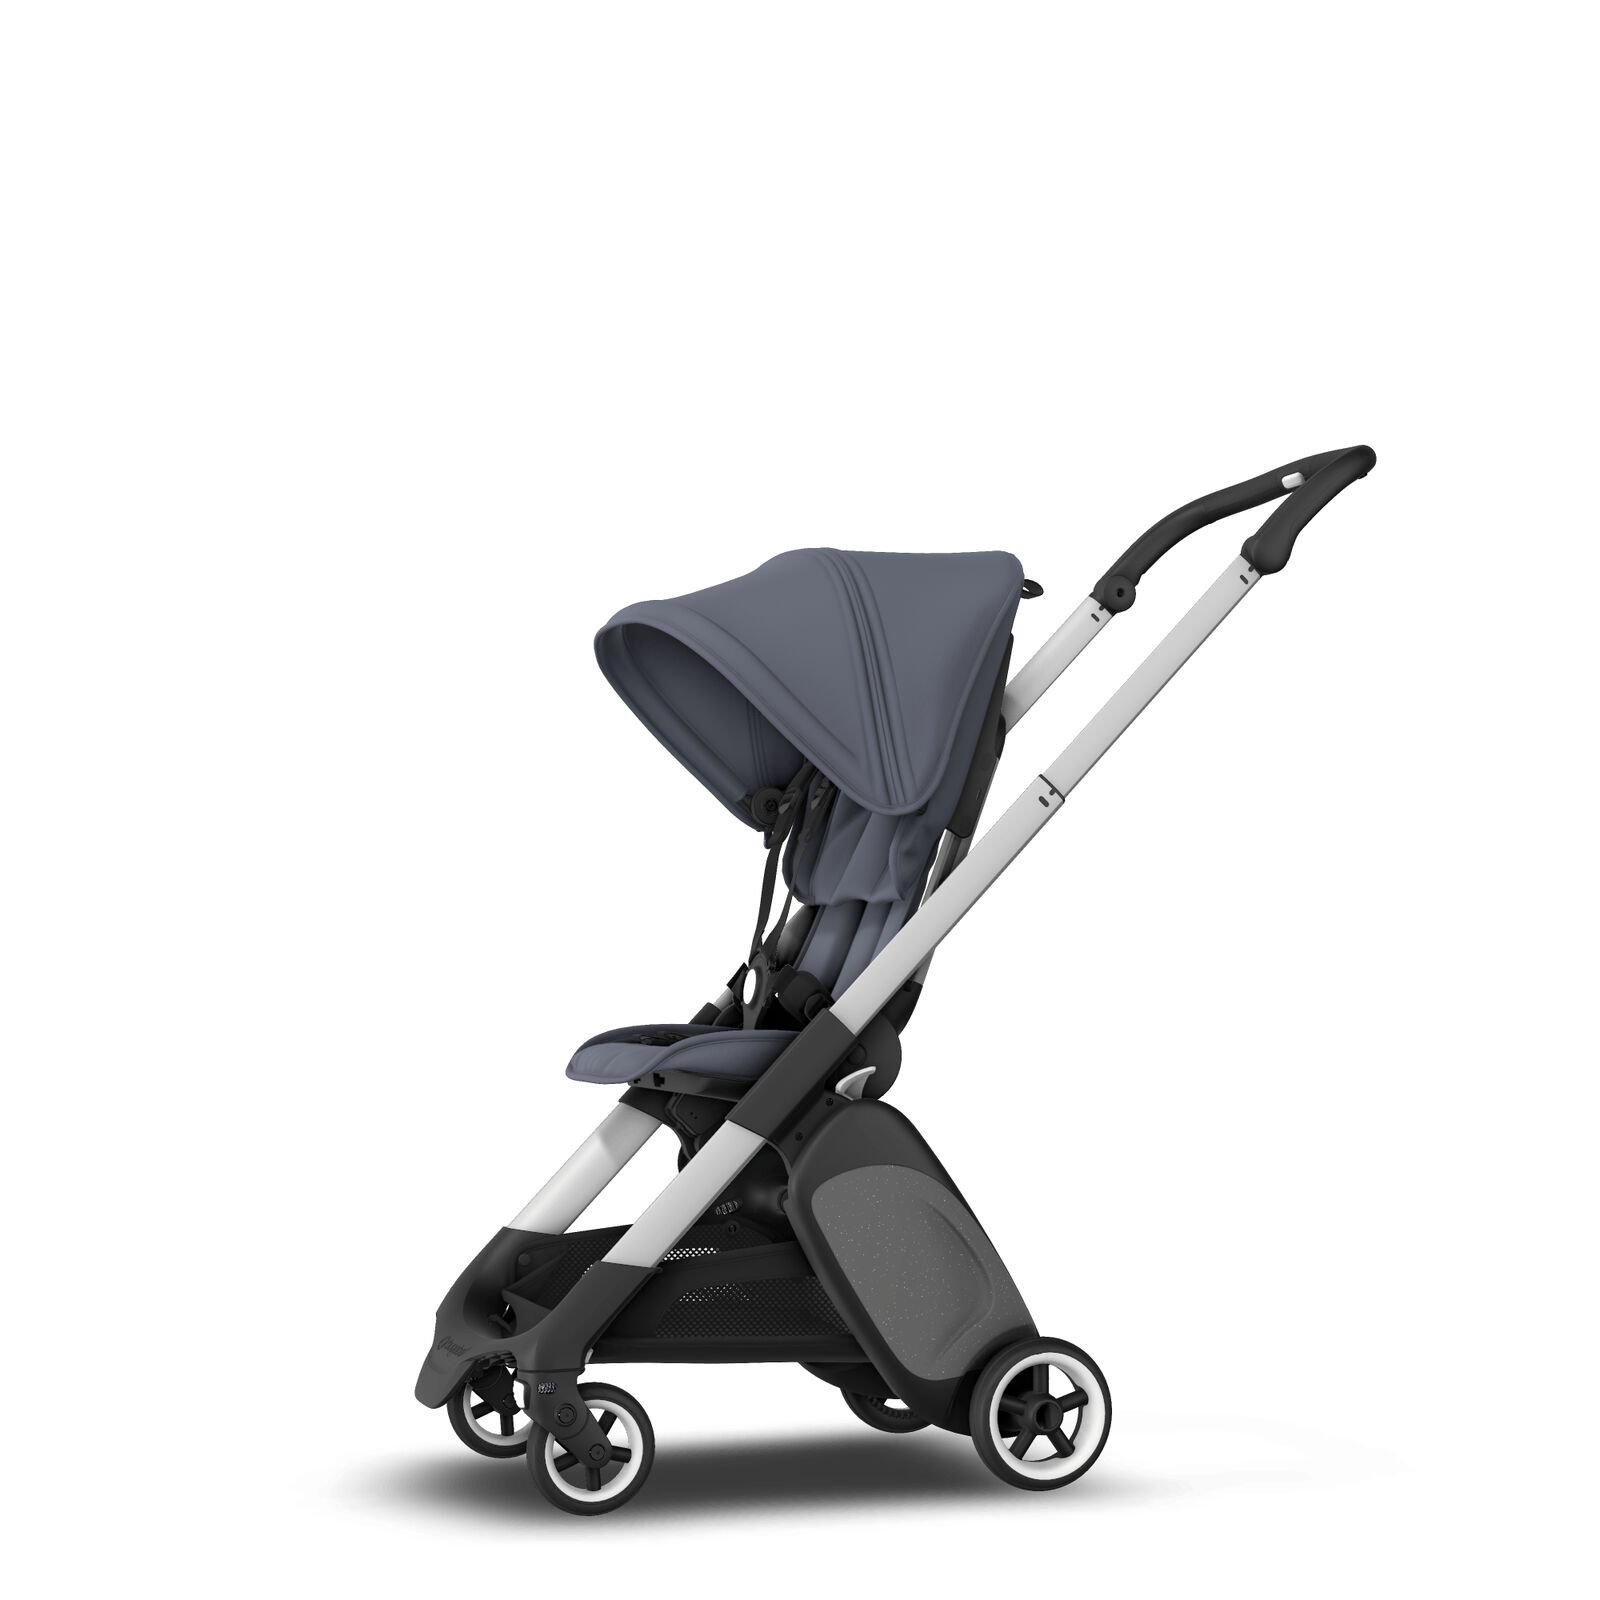 Bugaboo Ant ultra compact stroller - View 2